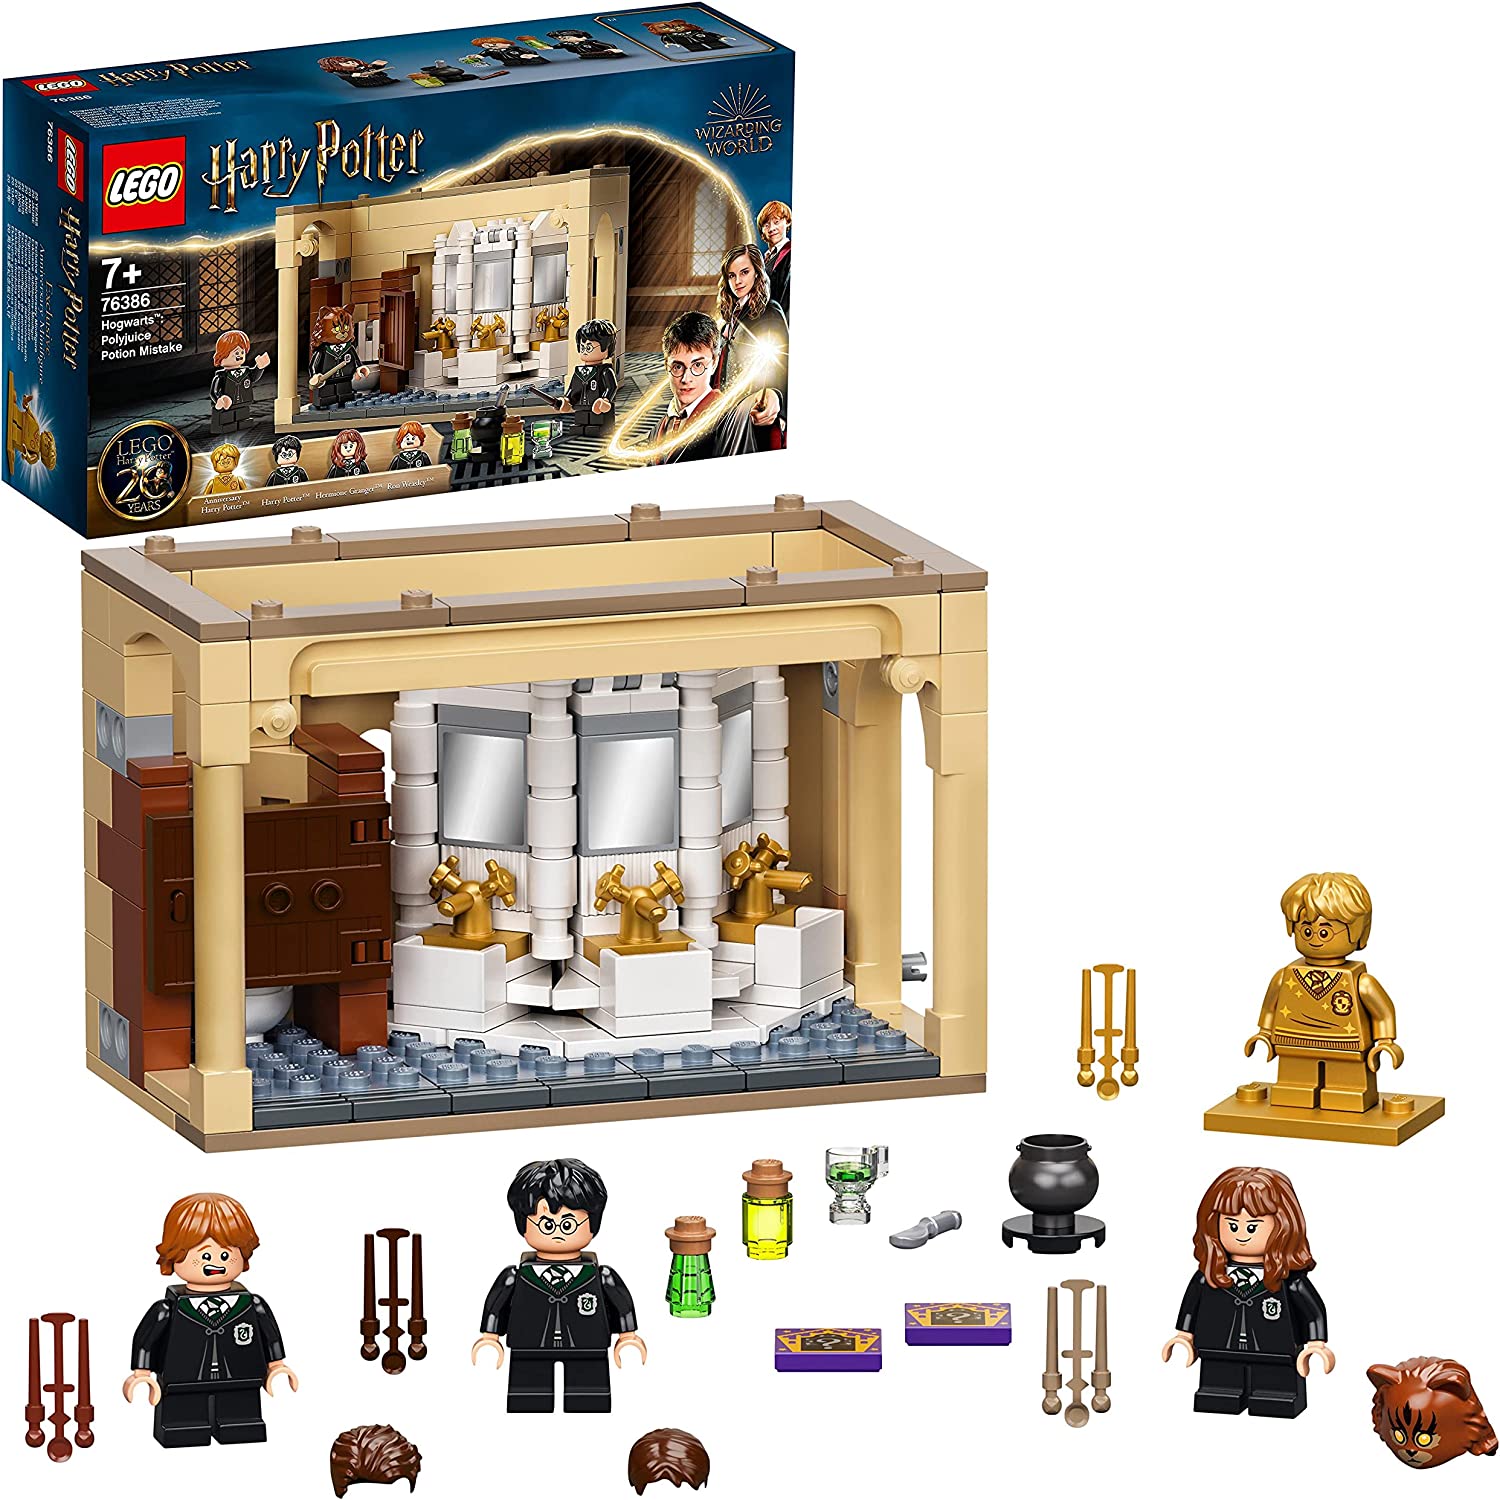 LEGO 76386 Harry Potter Hogwarts: Polyjuice Poison Mistake Set for 20th Anniversary with Harry as a Golden Mini Figure, Fan Item